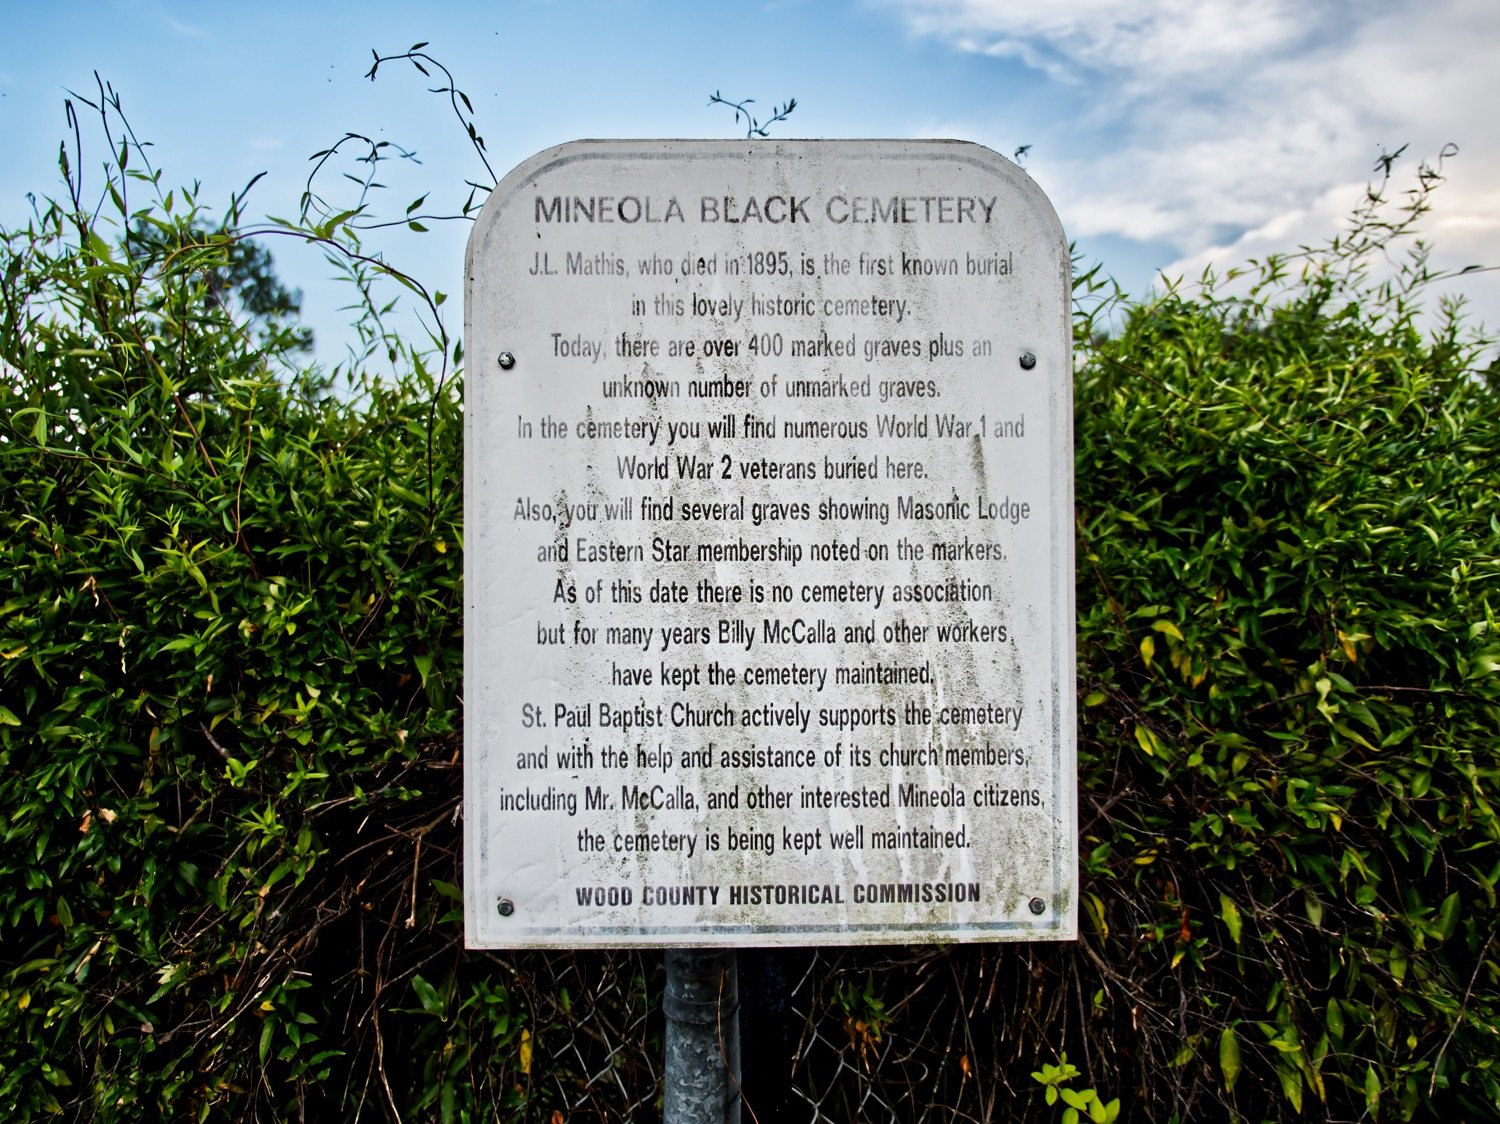 A historical marker standing just inside the fence between Cedar Memorial Gardens and the Black cemetery in Mineola reads as follows:
MINEOLA BLACK CEMETERYJ.L. Mathis, who died in 1895, is the first known burial in this lovely historic cemetery.Today, there are over 400 marked graves plus an unknown number of unmarked graves.In the cemetery you will find numerous World War 1 and World War 2 veterans buried here.Also, you will find several graves showing Masonic Lodge and Eastern Star membership noted on the markers.As of this date, there is no cemetery association but for many years Billy McCalla and other workers have kept the cemetery maintained.St. Paul Baptist Church actively supports the cemetery and with the help and assistance of its church members, including Mr. McCalla, and other interested Mineola Citizens, the cemetery is being kept well maintained.
WOOD COUNTY HISTORICAL COMMISSION